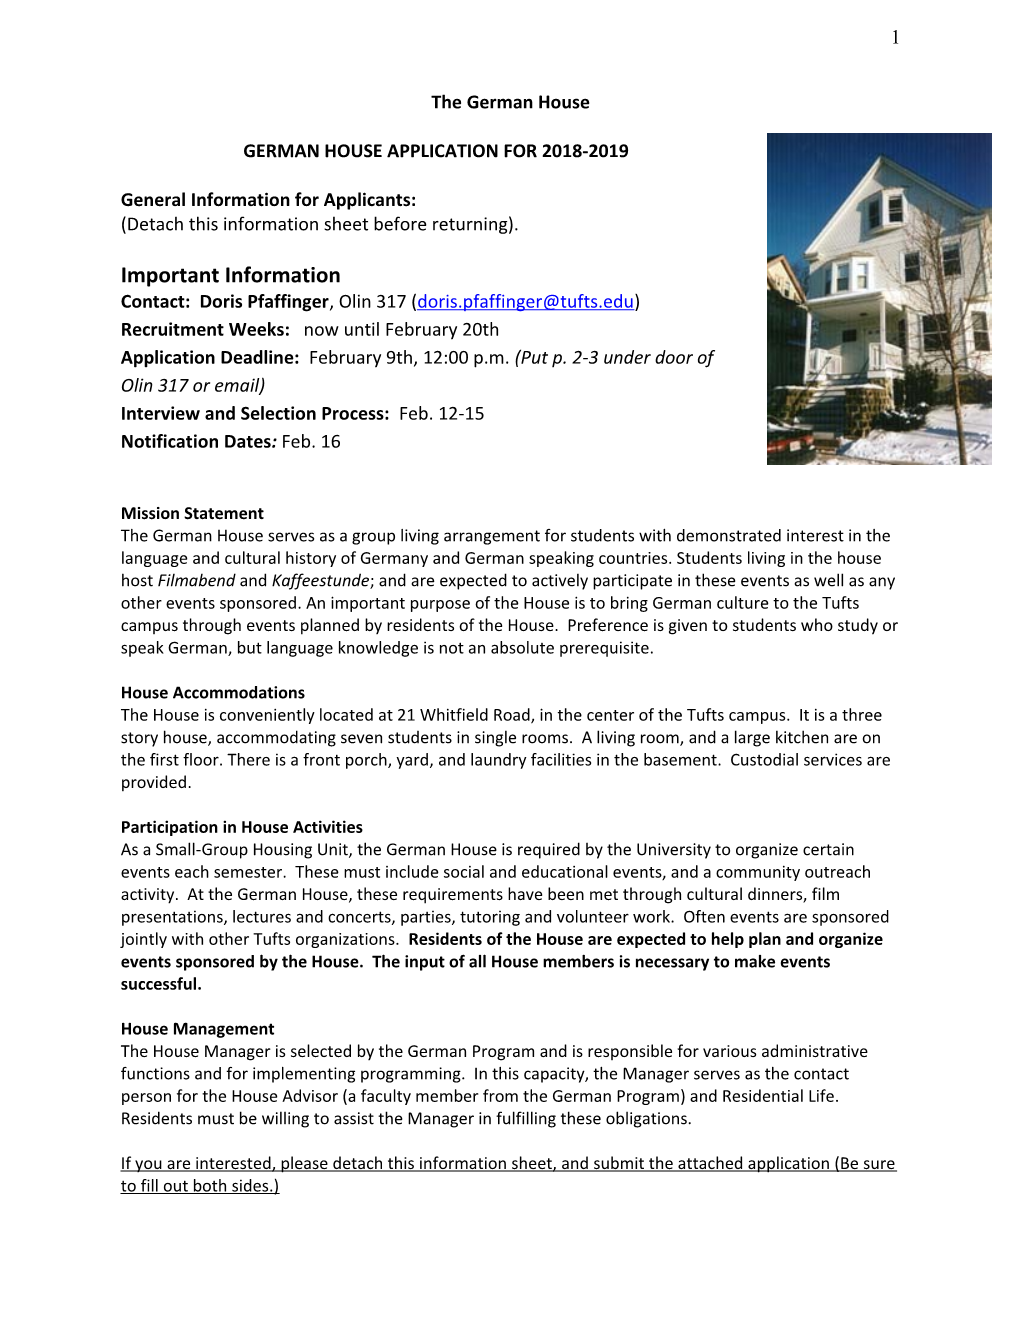 German House Application for 2018-2019